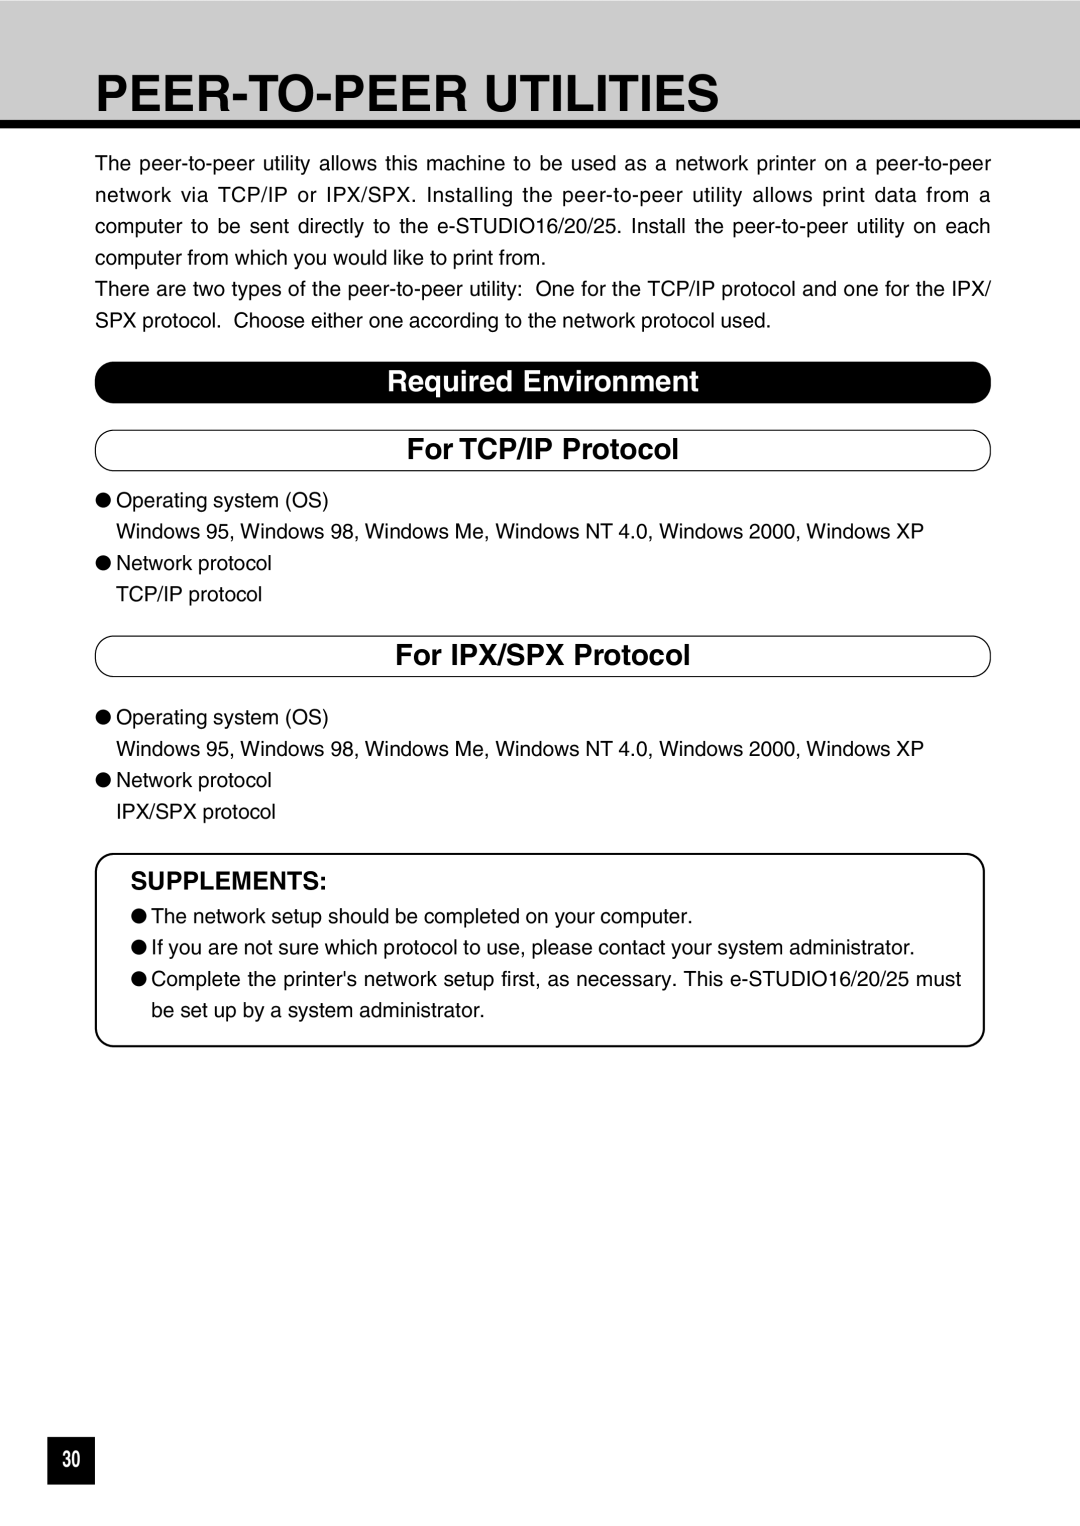 Toshiba GA-1031 manual PEER-TO-PEER Utilities, Required Environment, For TCP/IP Protocol, For IPX/SPX Protocol 